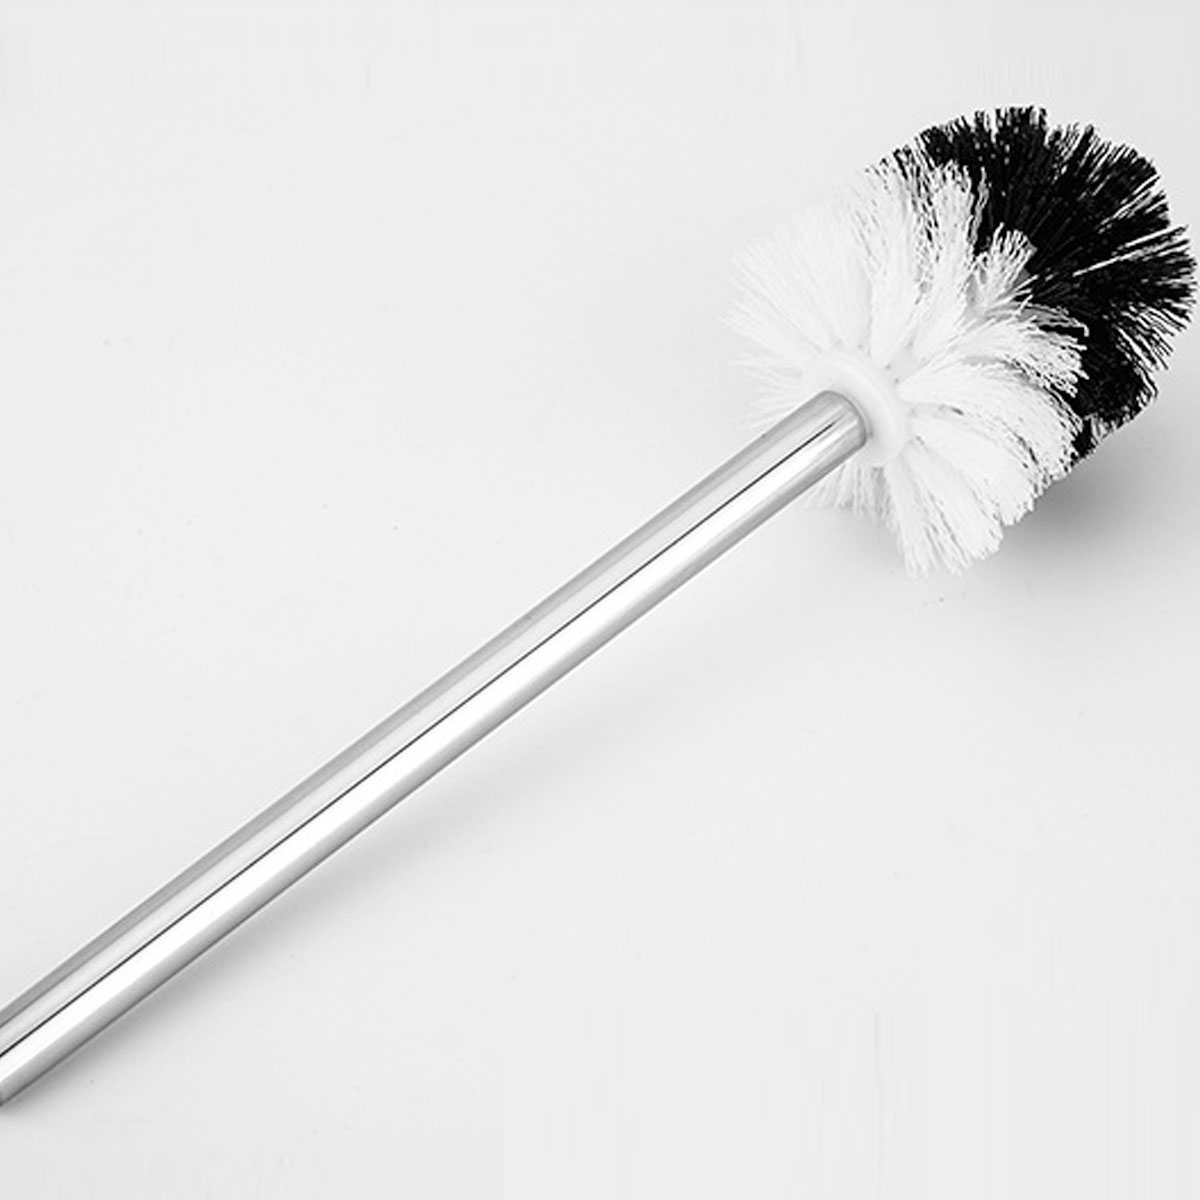 Toilet-Cleaning-Brushes-Dead-Corner-Soft-Hair-Wall-Mounted-Household-Bathroom-Cleaning-1602218-2